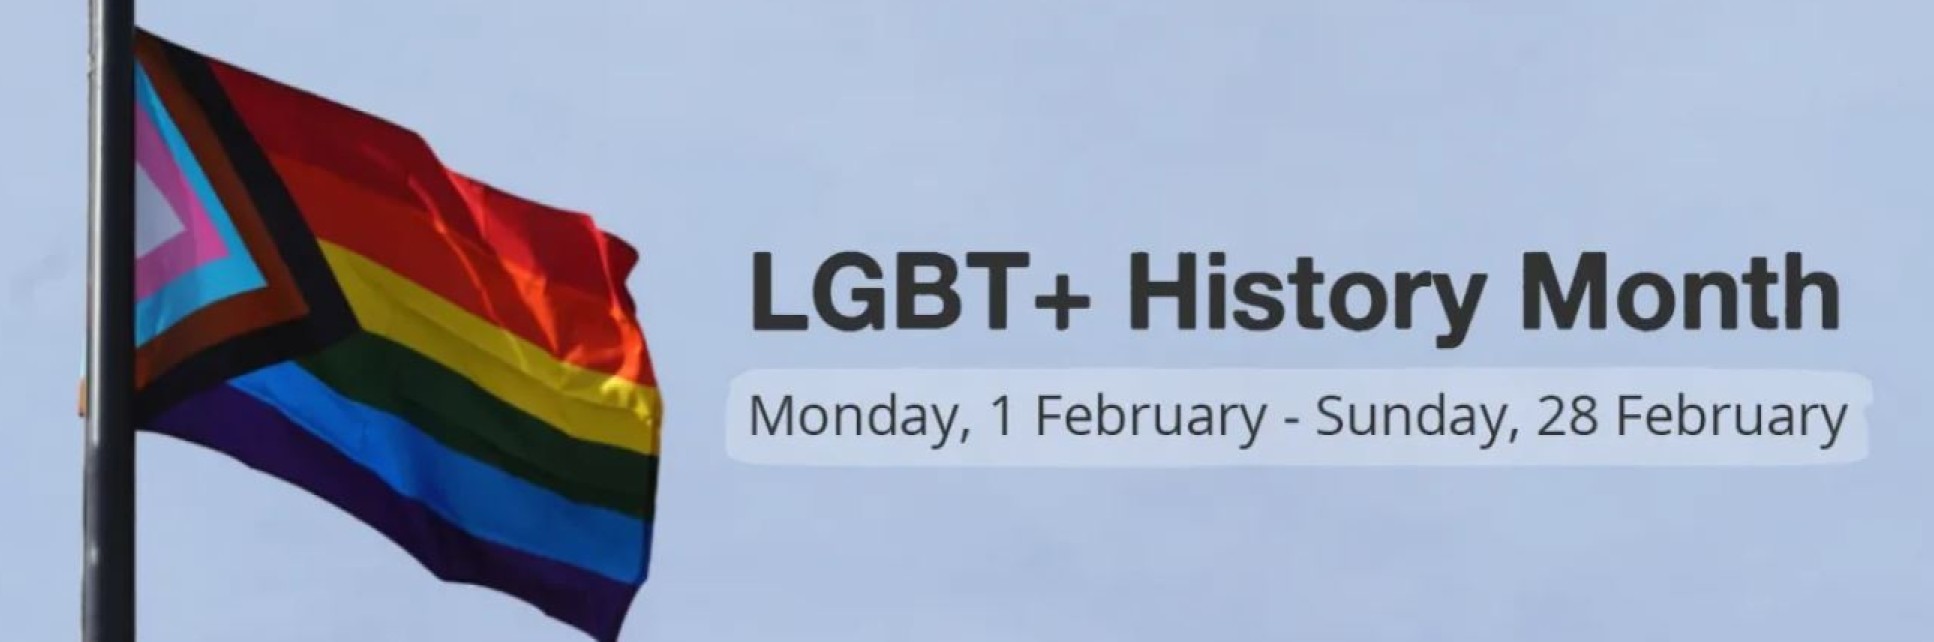 LGBT+ History Month image